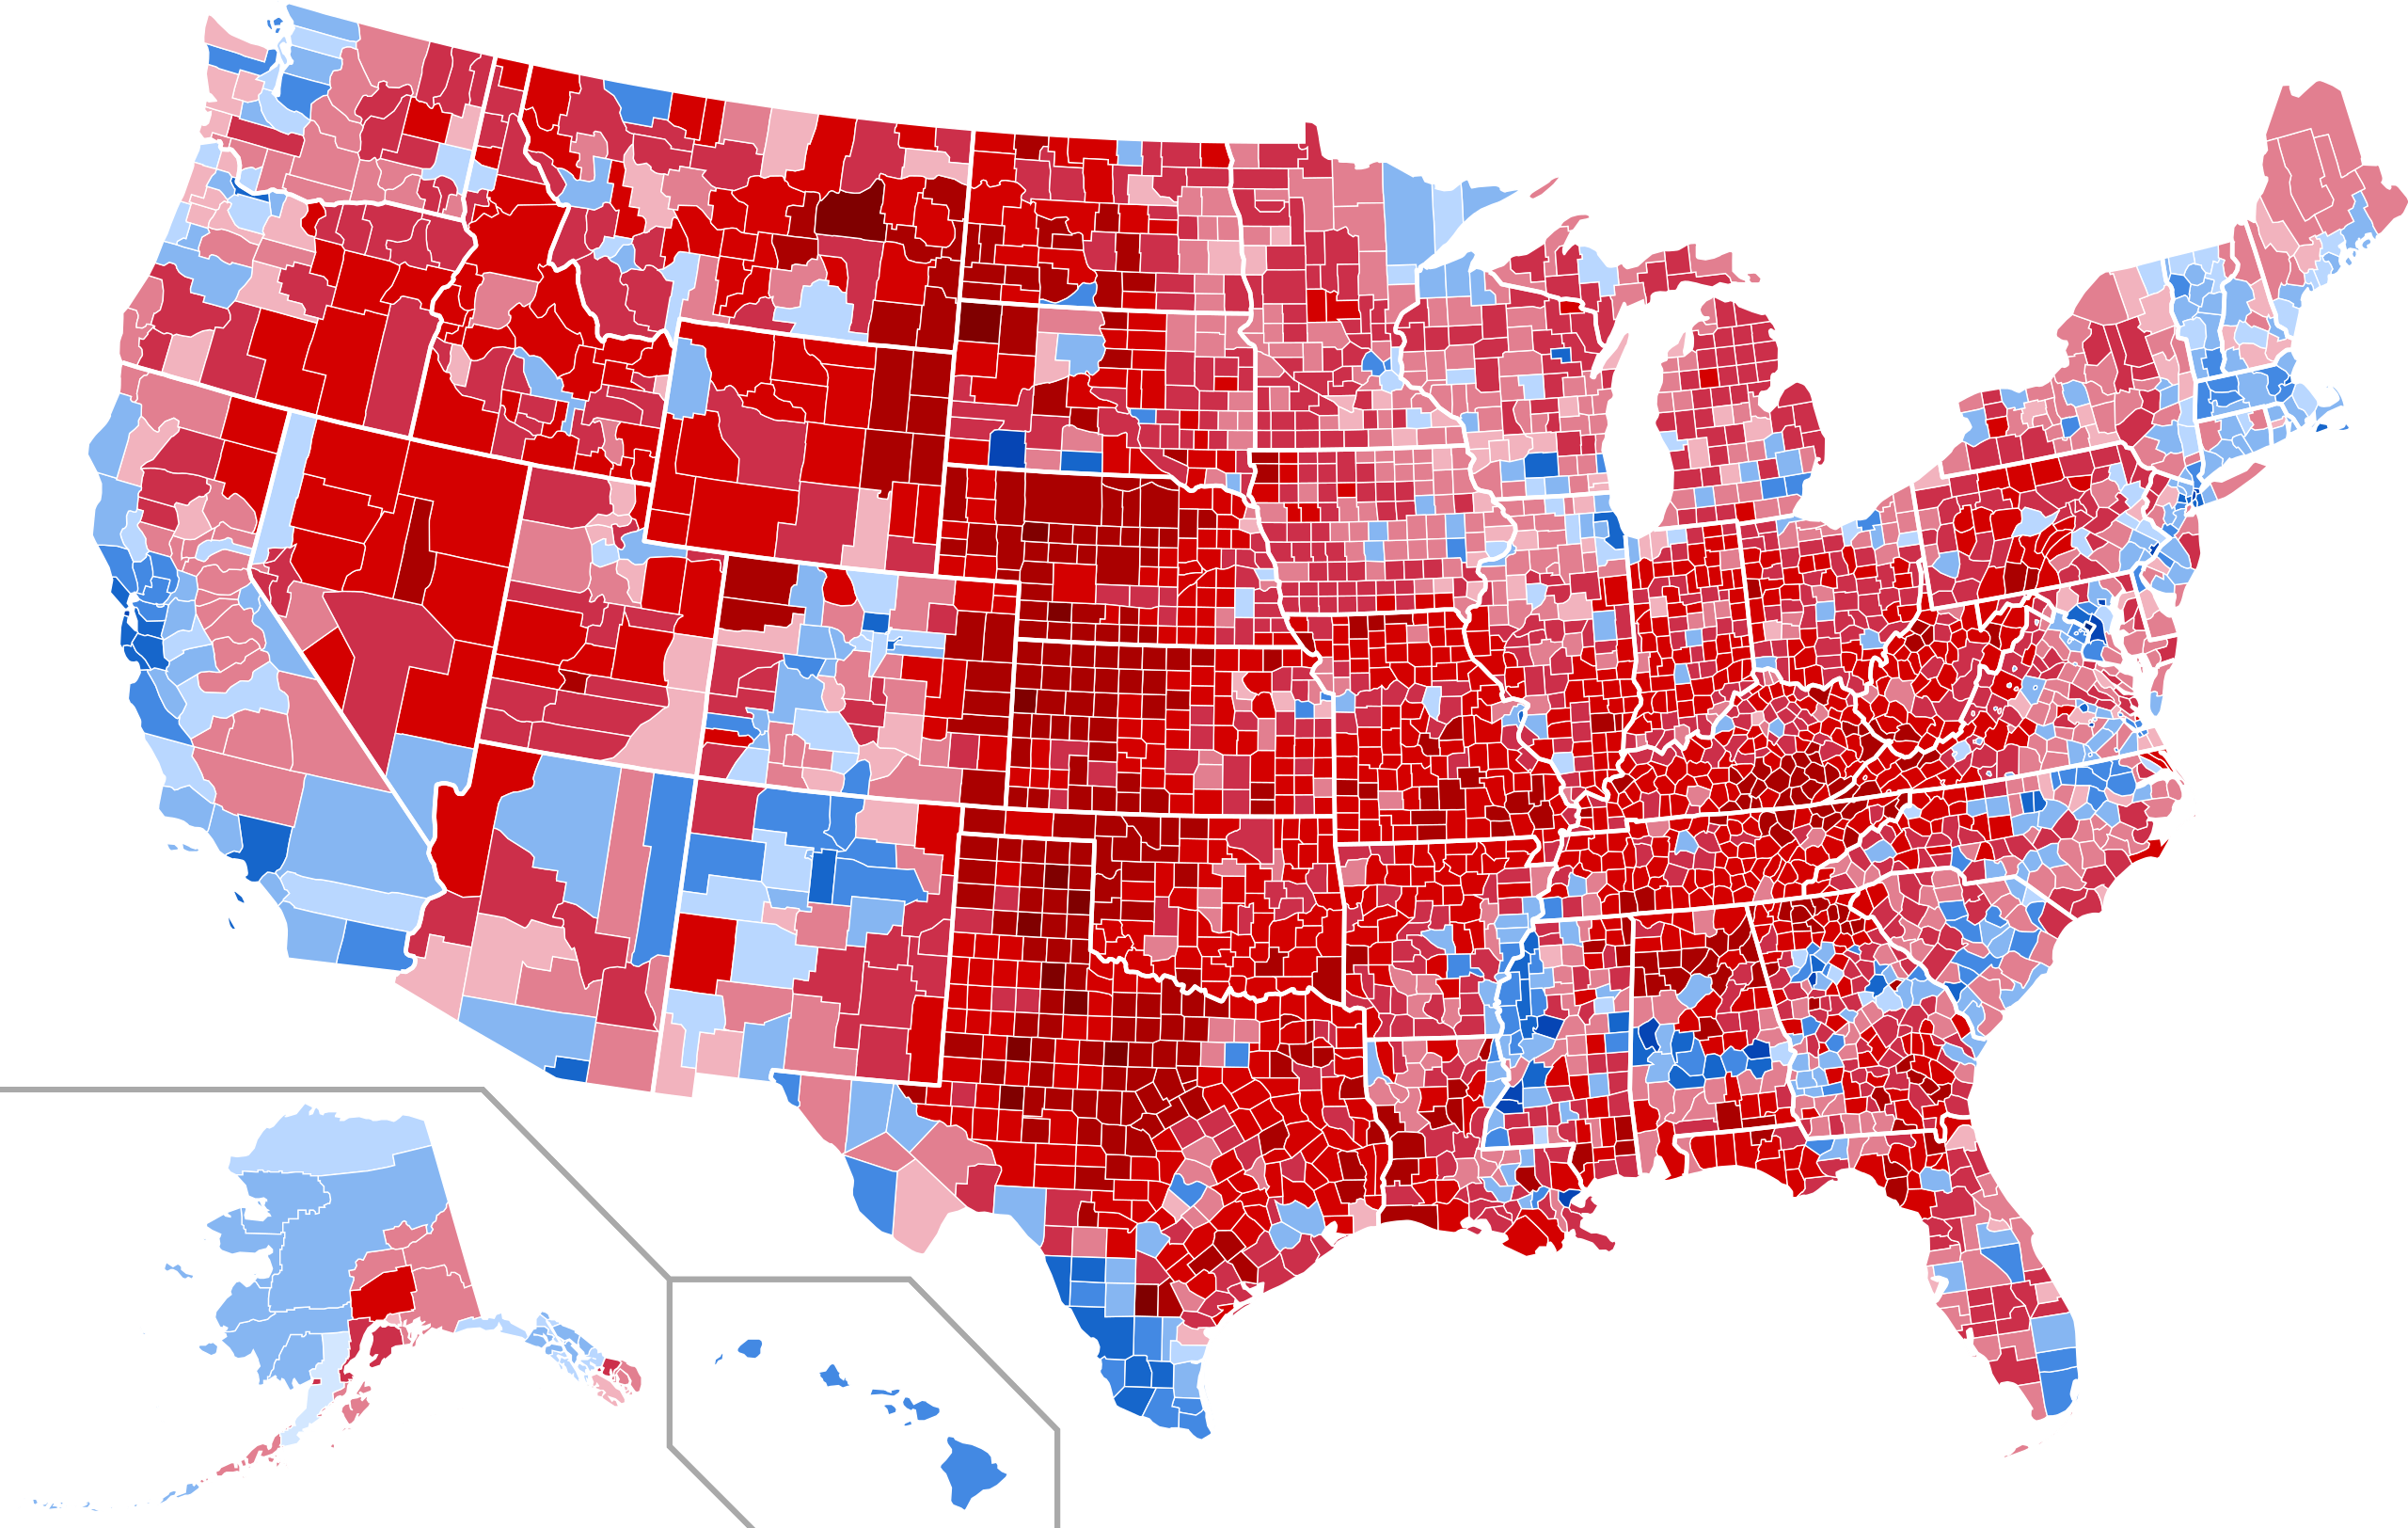 County-level results for 2016 presidential election.